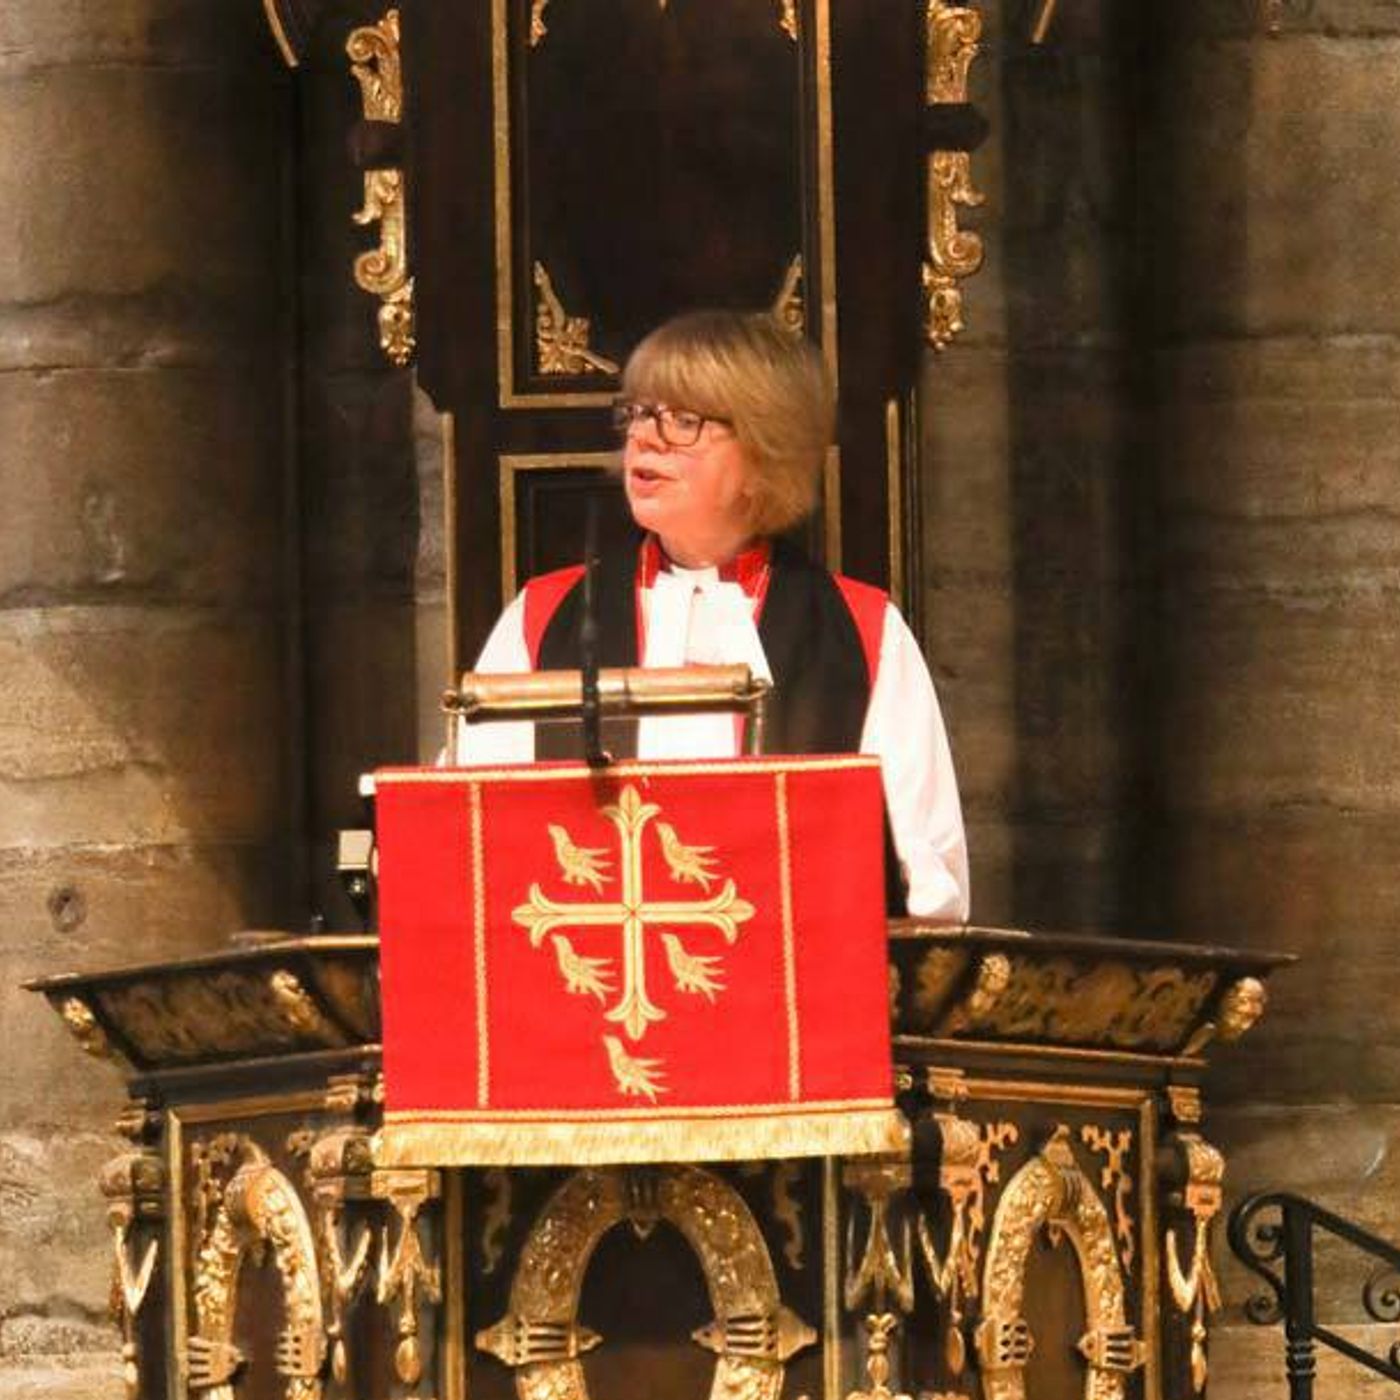 The Bishop of London's Address at the St Cecilia service, 2019